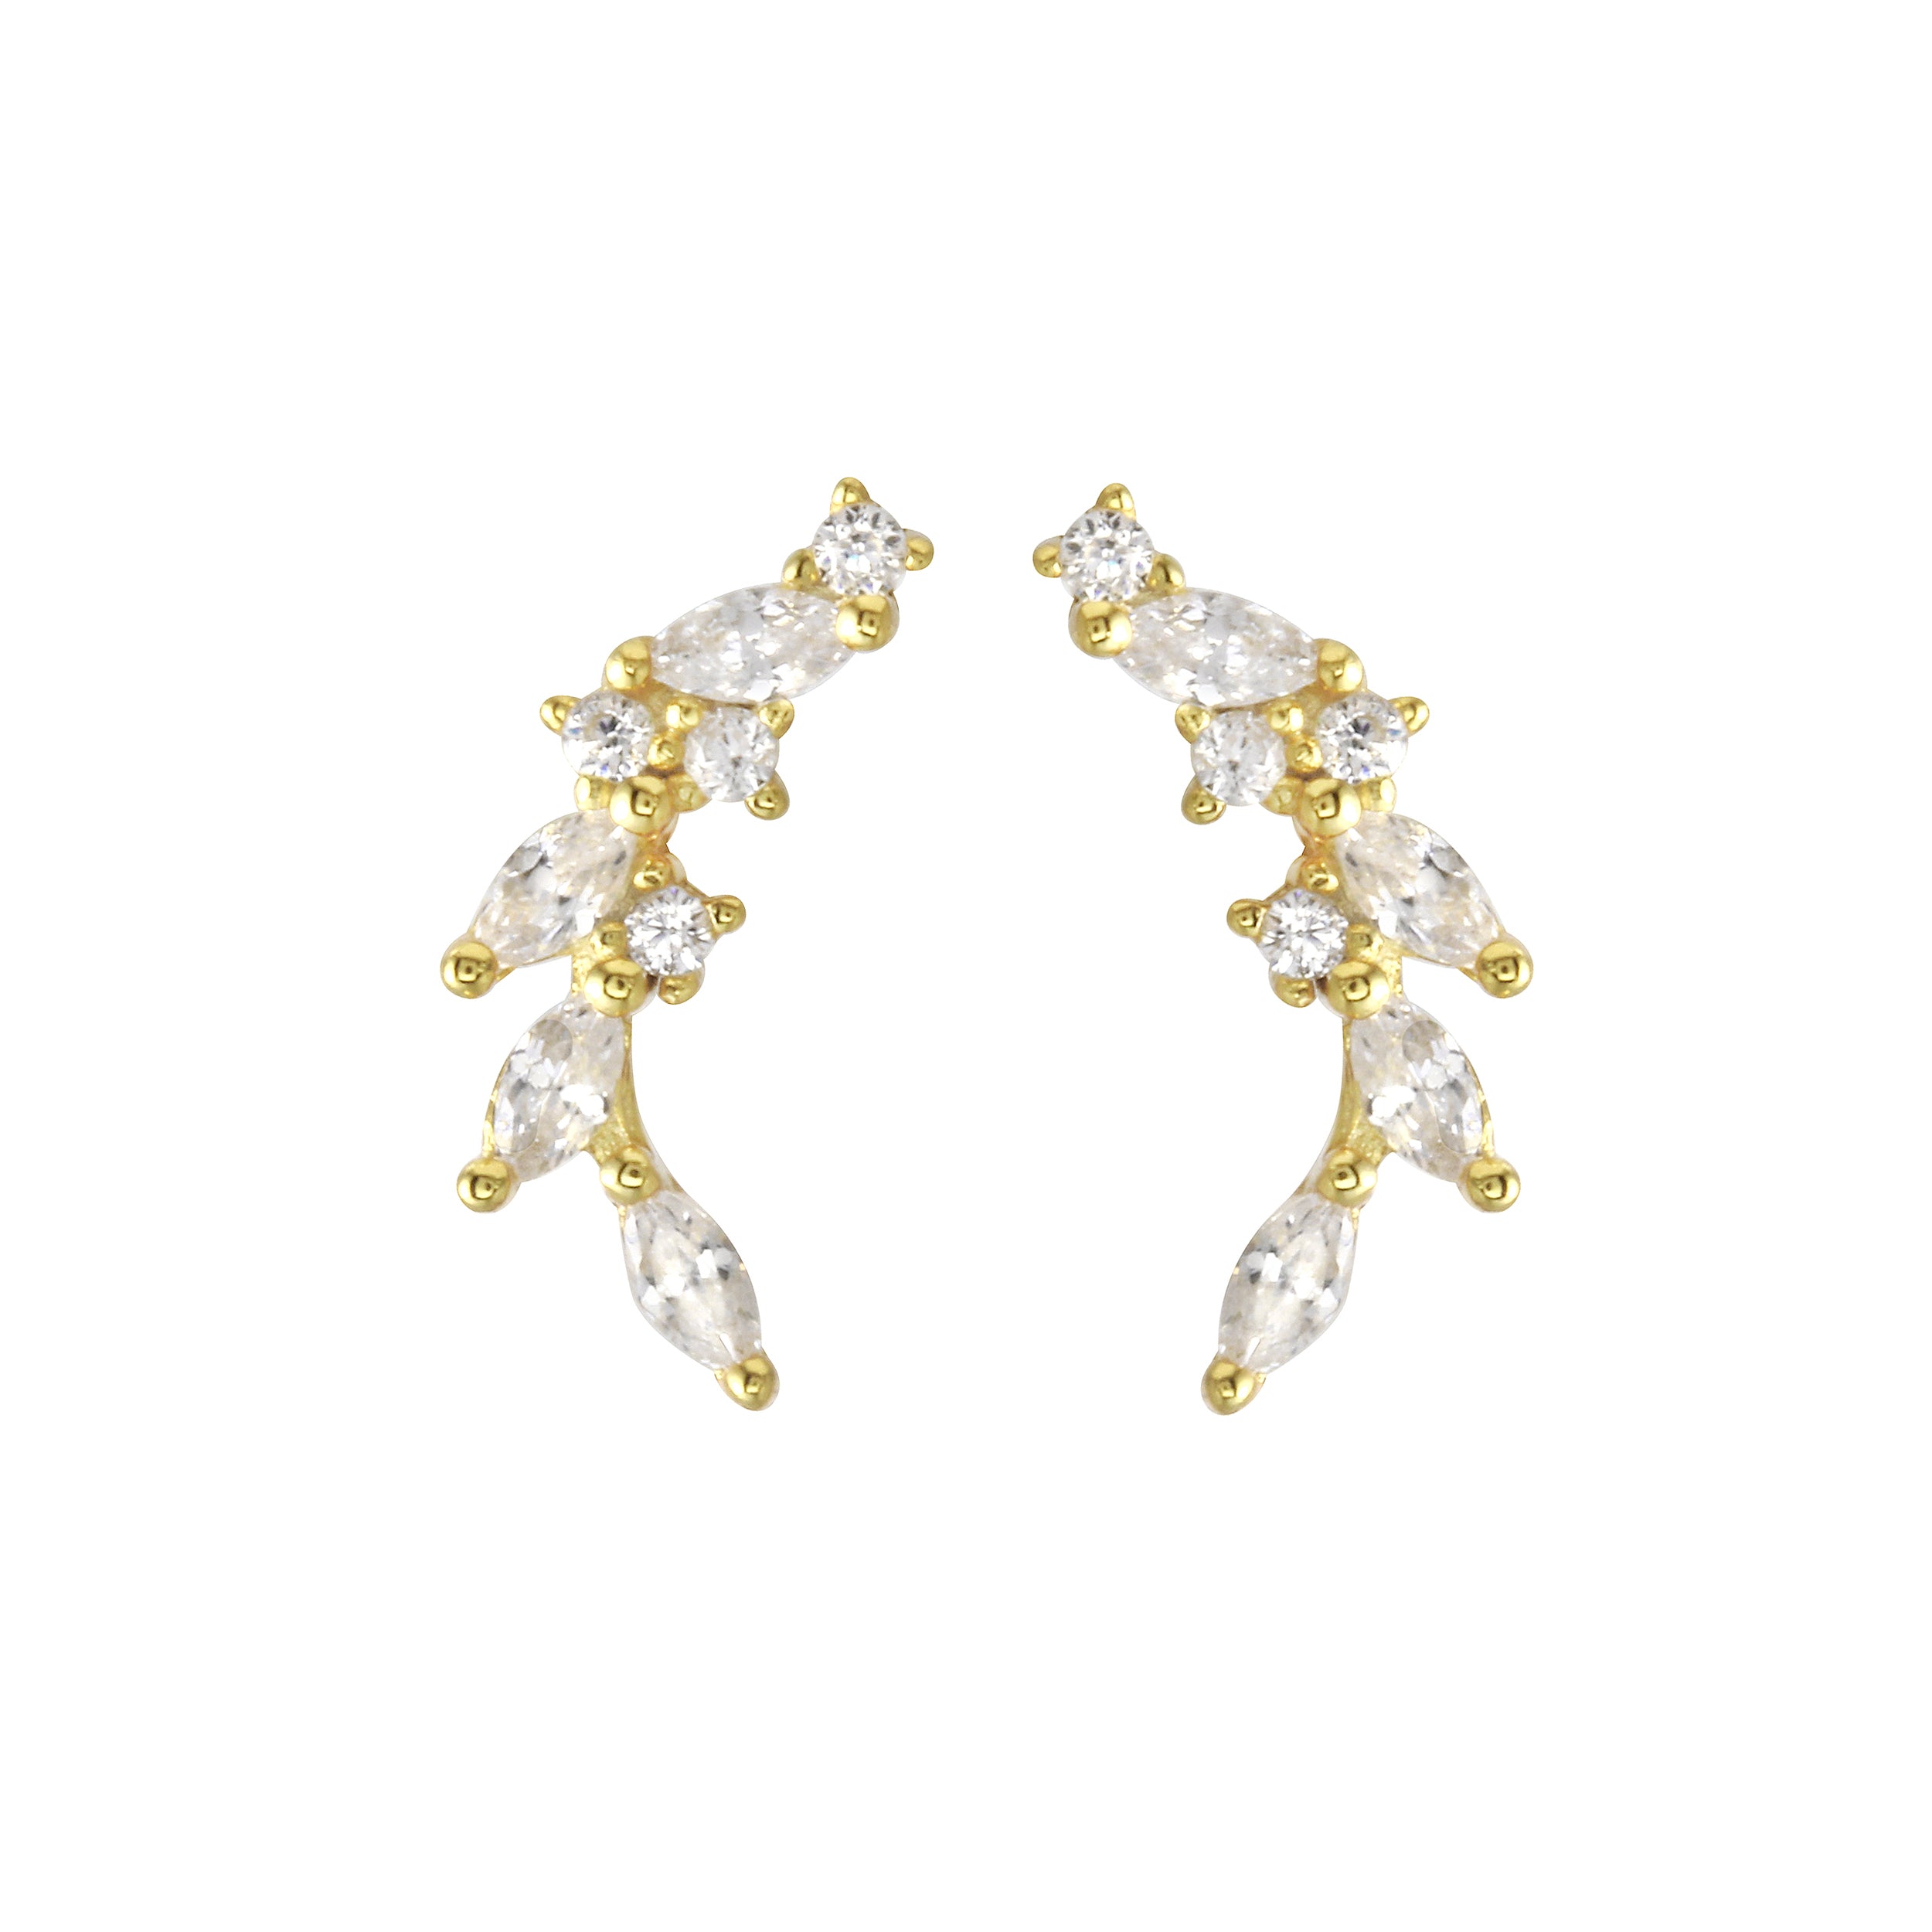 Marquise and Round CZ Floral Climber Earrings-Earrings-Ashley Schenkein Jewelry Design